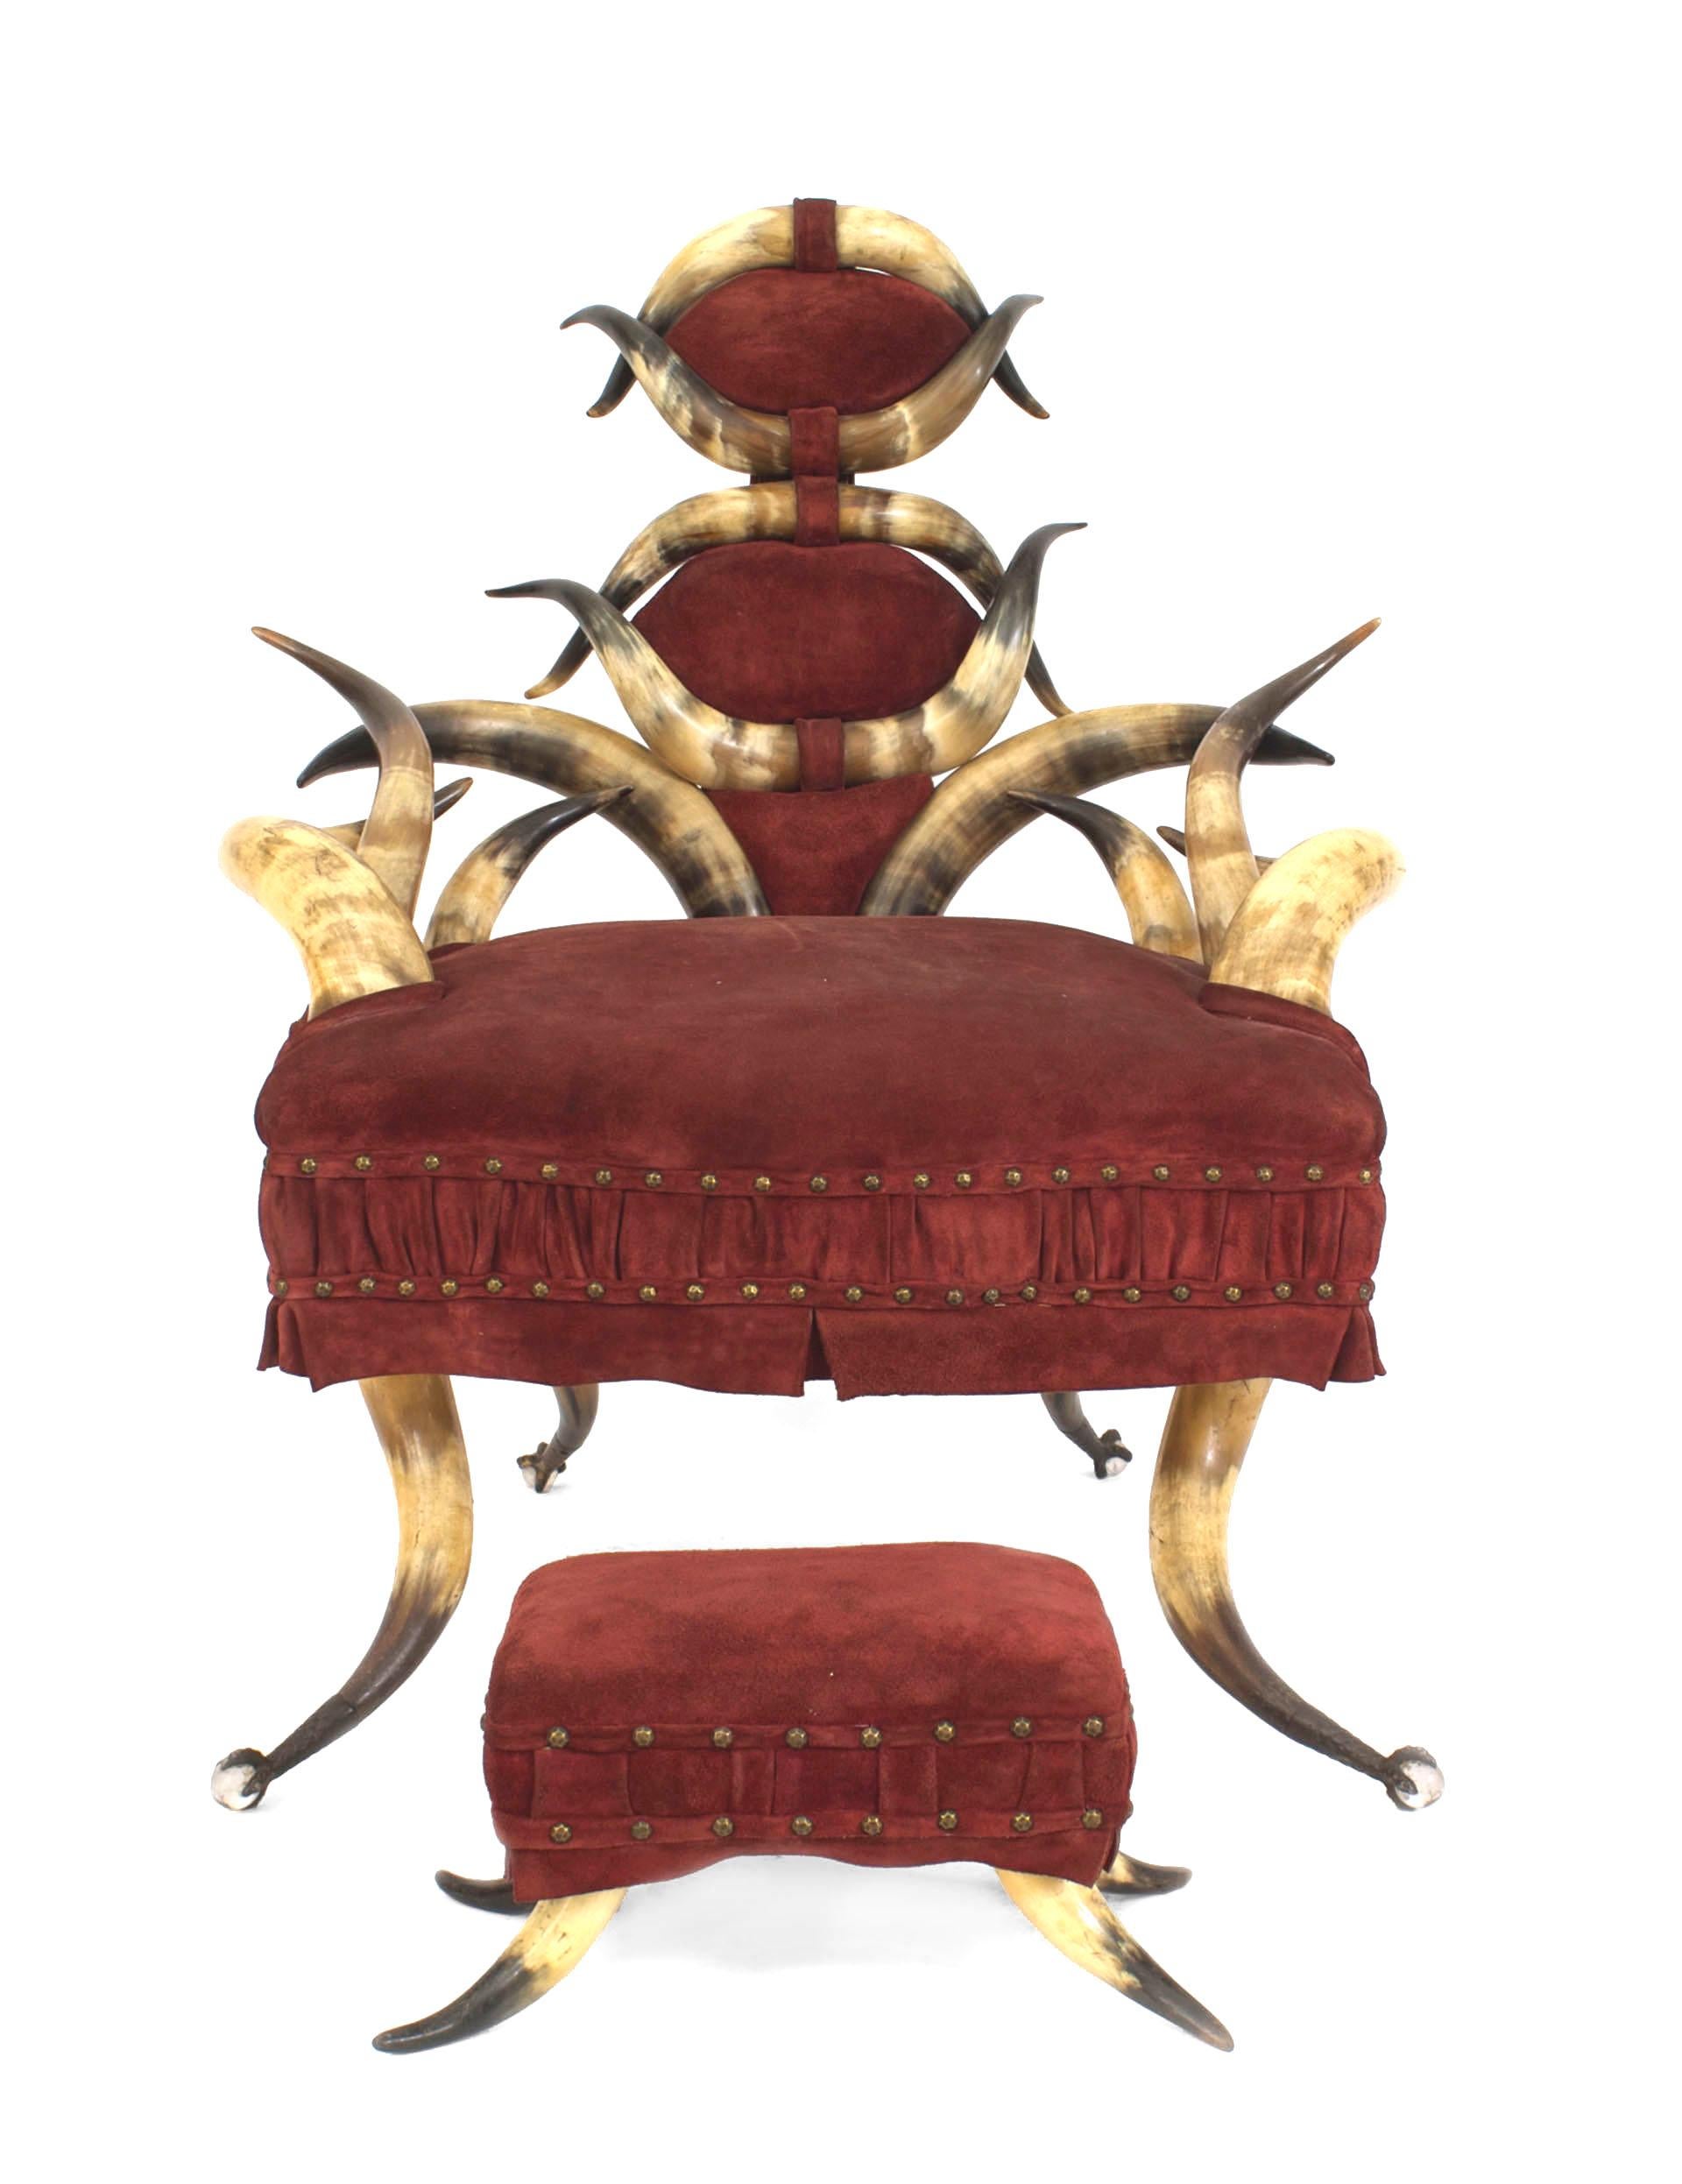 American Victorian steer horn arm chair with maroon velvet upholstered seat & back and metal claw feet holding crystal balls. Includes matching foot stool 17